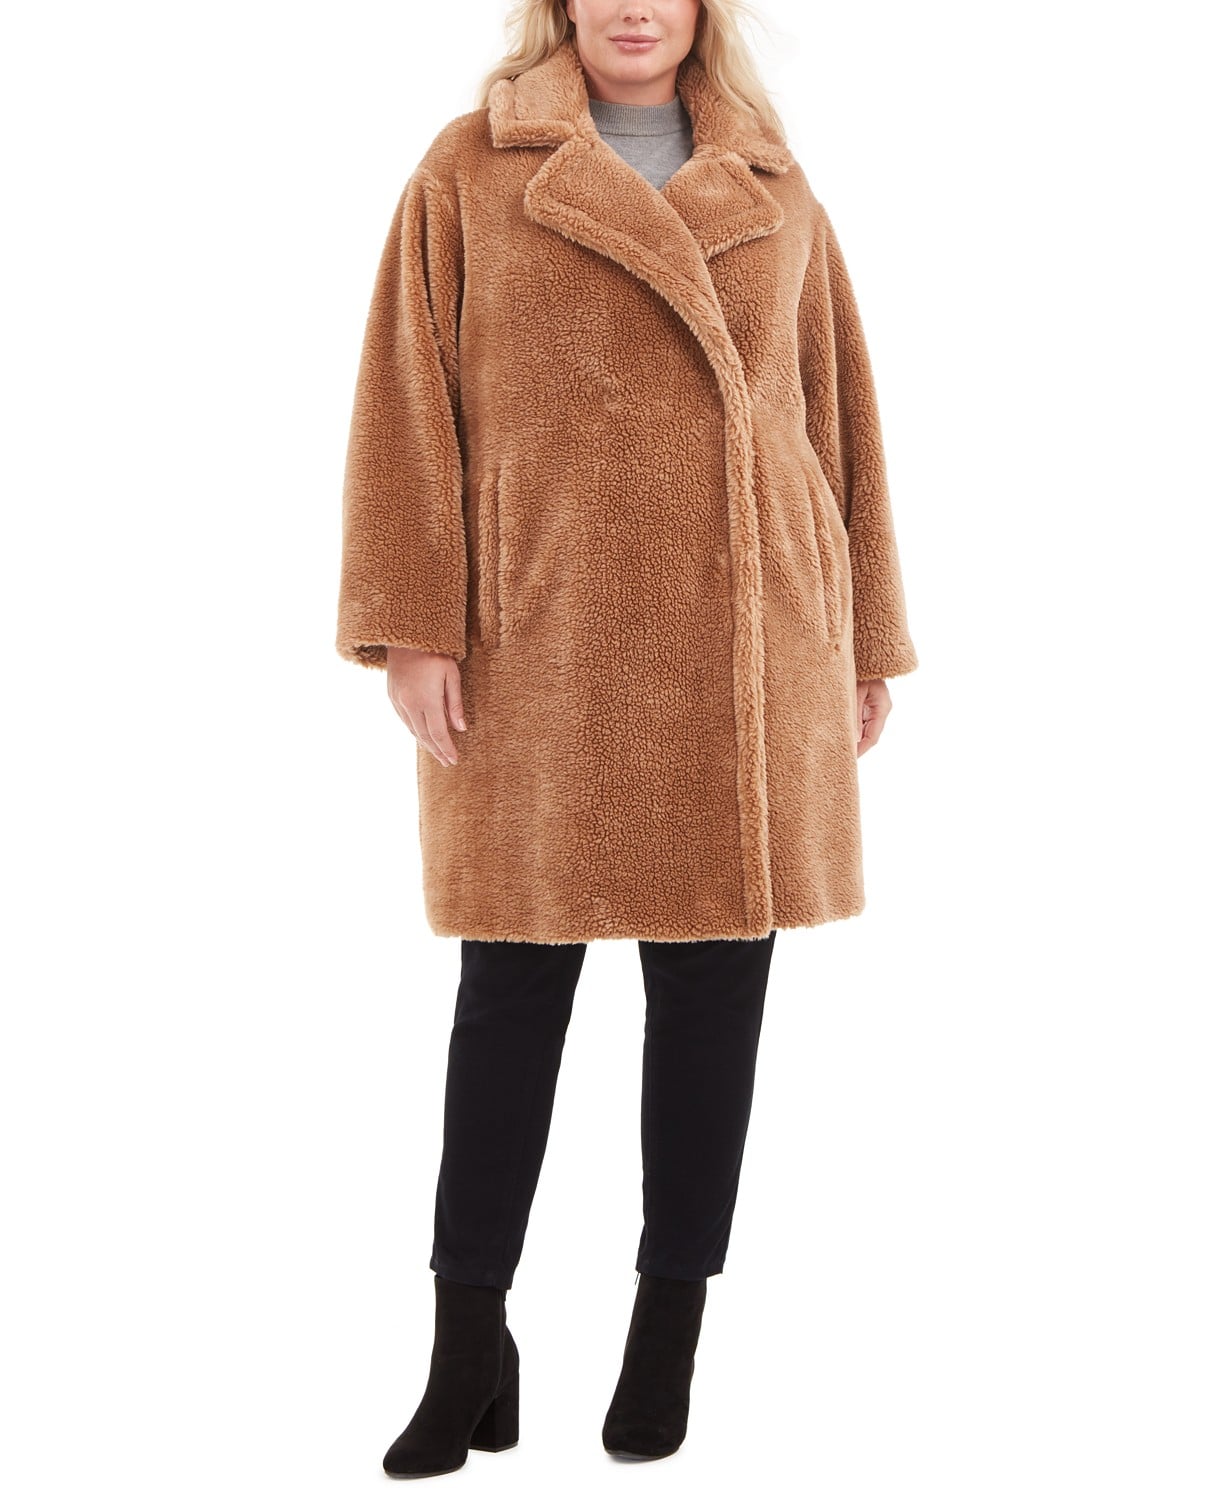 Michael Kors Plus Size Faux-Fur Teddy Coat | 15 Chic and Comfy Coats For  Curvy Figures — Starting at Just $85 | POPSUGAR Fashion Photo 8